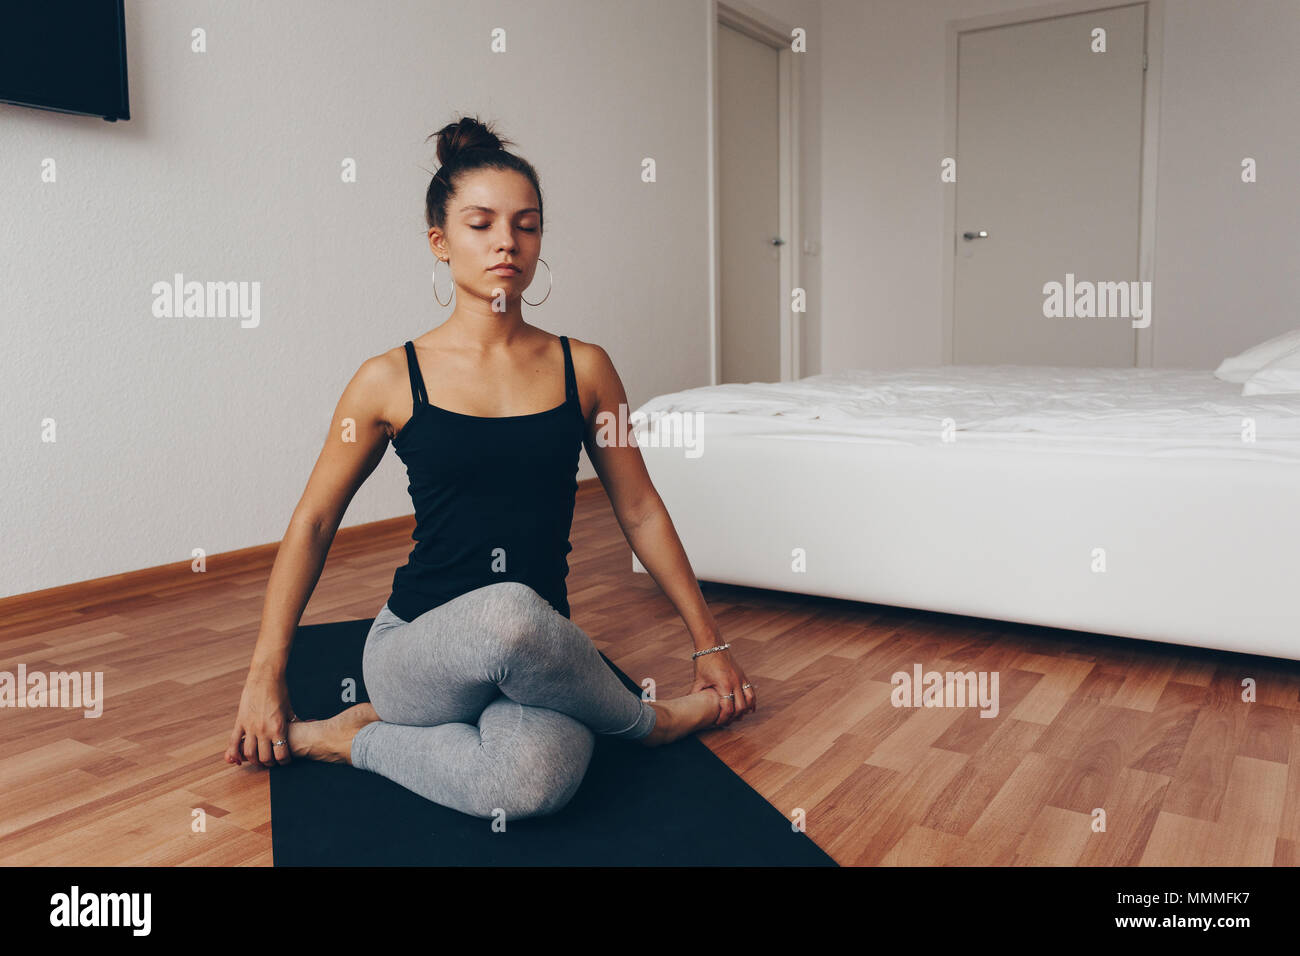 Young woman meditating indoors. A series of yoga poses. lifestyle concept. Stock Photo